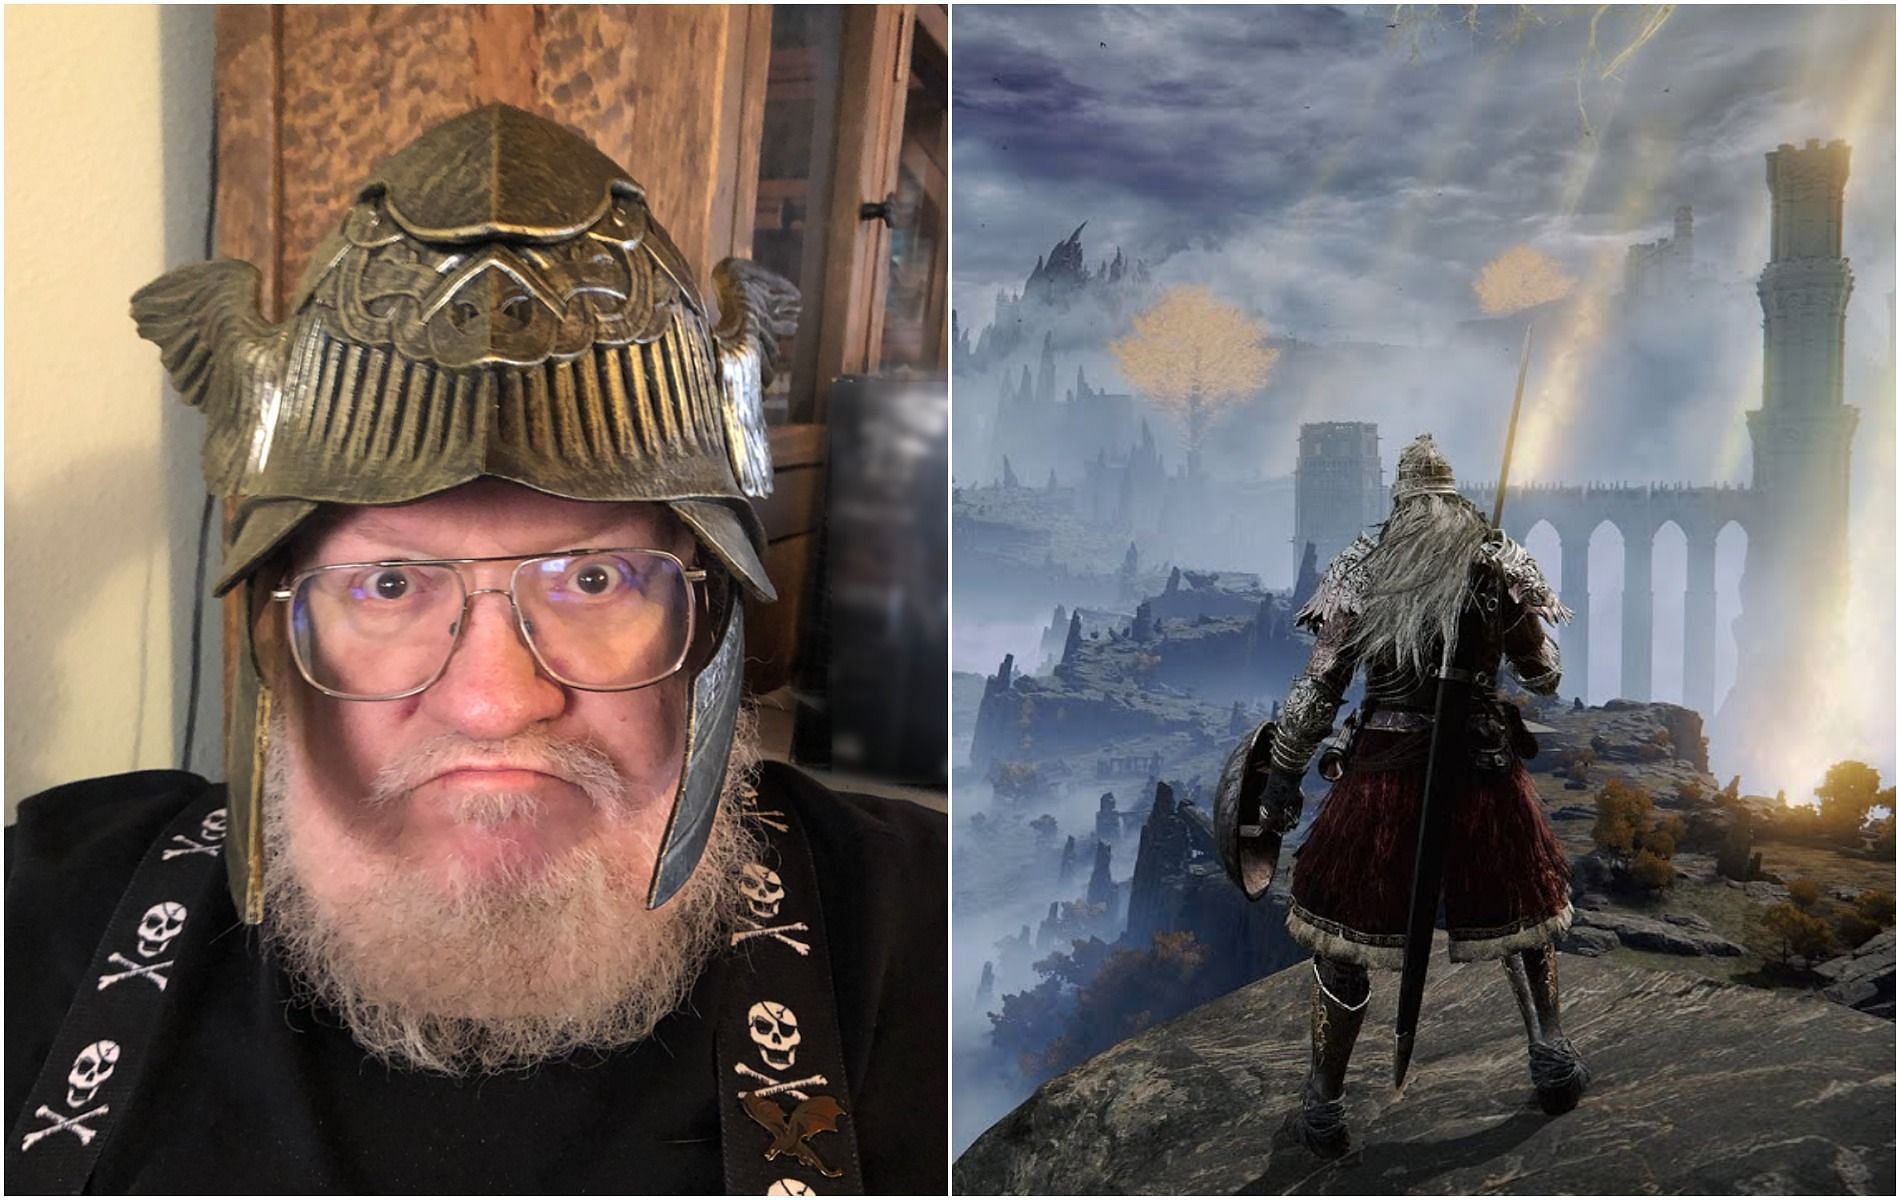 George R. R. Martin talks about his experience with Elden Ring (Image by Twitter/GRRMspeaking and FromSoftware)